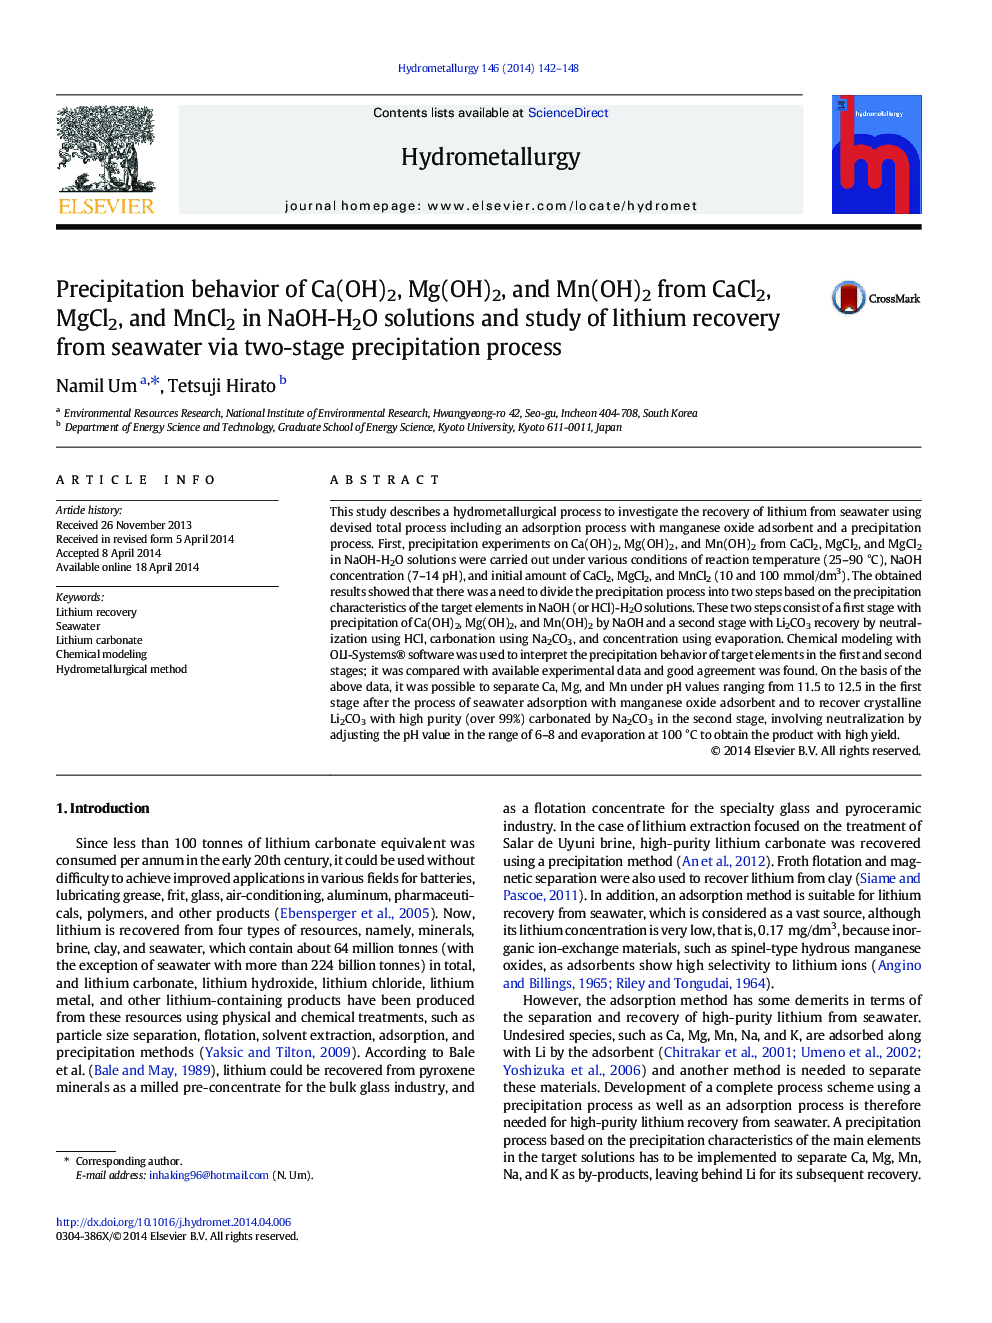 Precipitation behavior of Ca(OH)2, Mg(OH)2, and Mn(OH)2 from CaCl2, MgCl2, and MnCl2 in NaOH-H2O solutions and study of lithium recovery from seawater via two-stage precipitation process